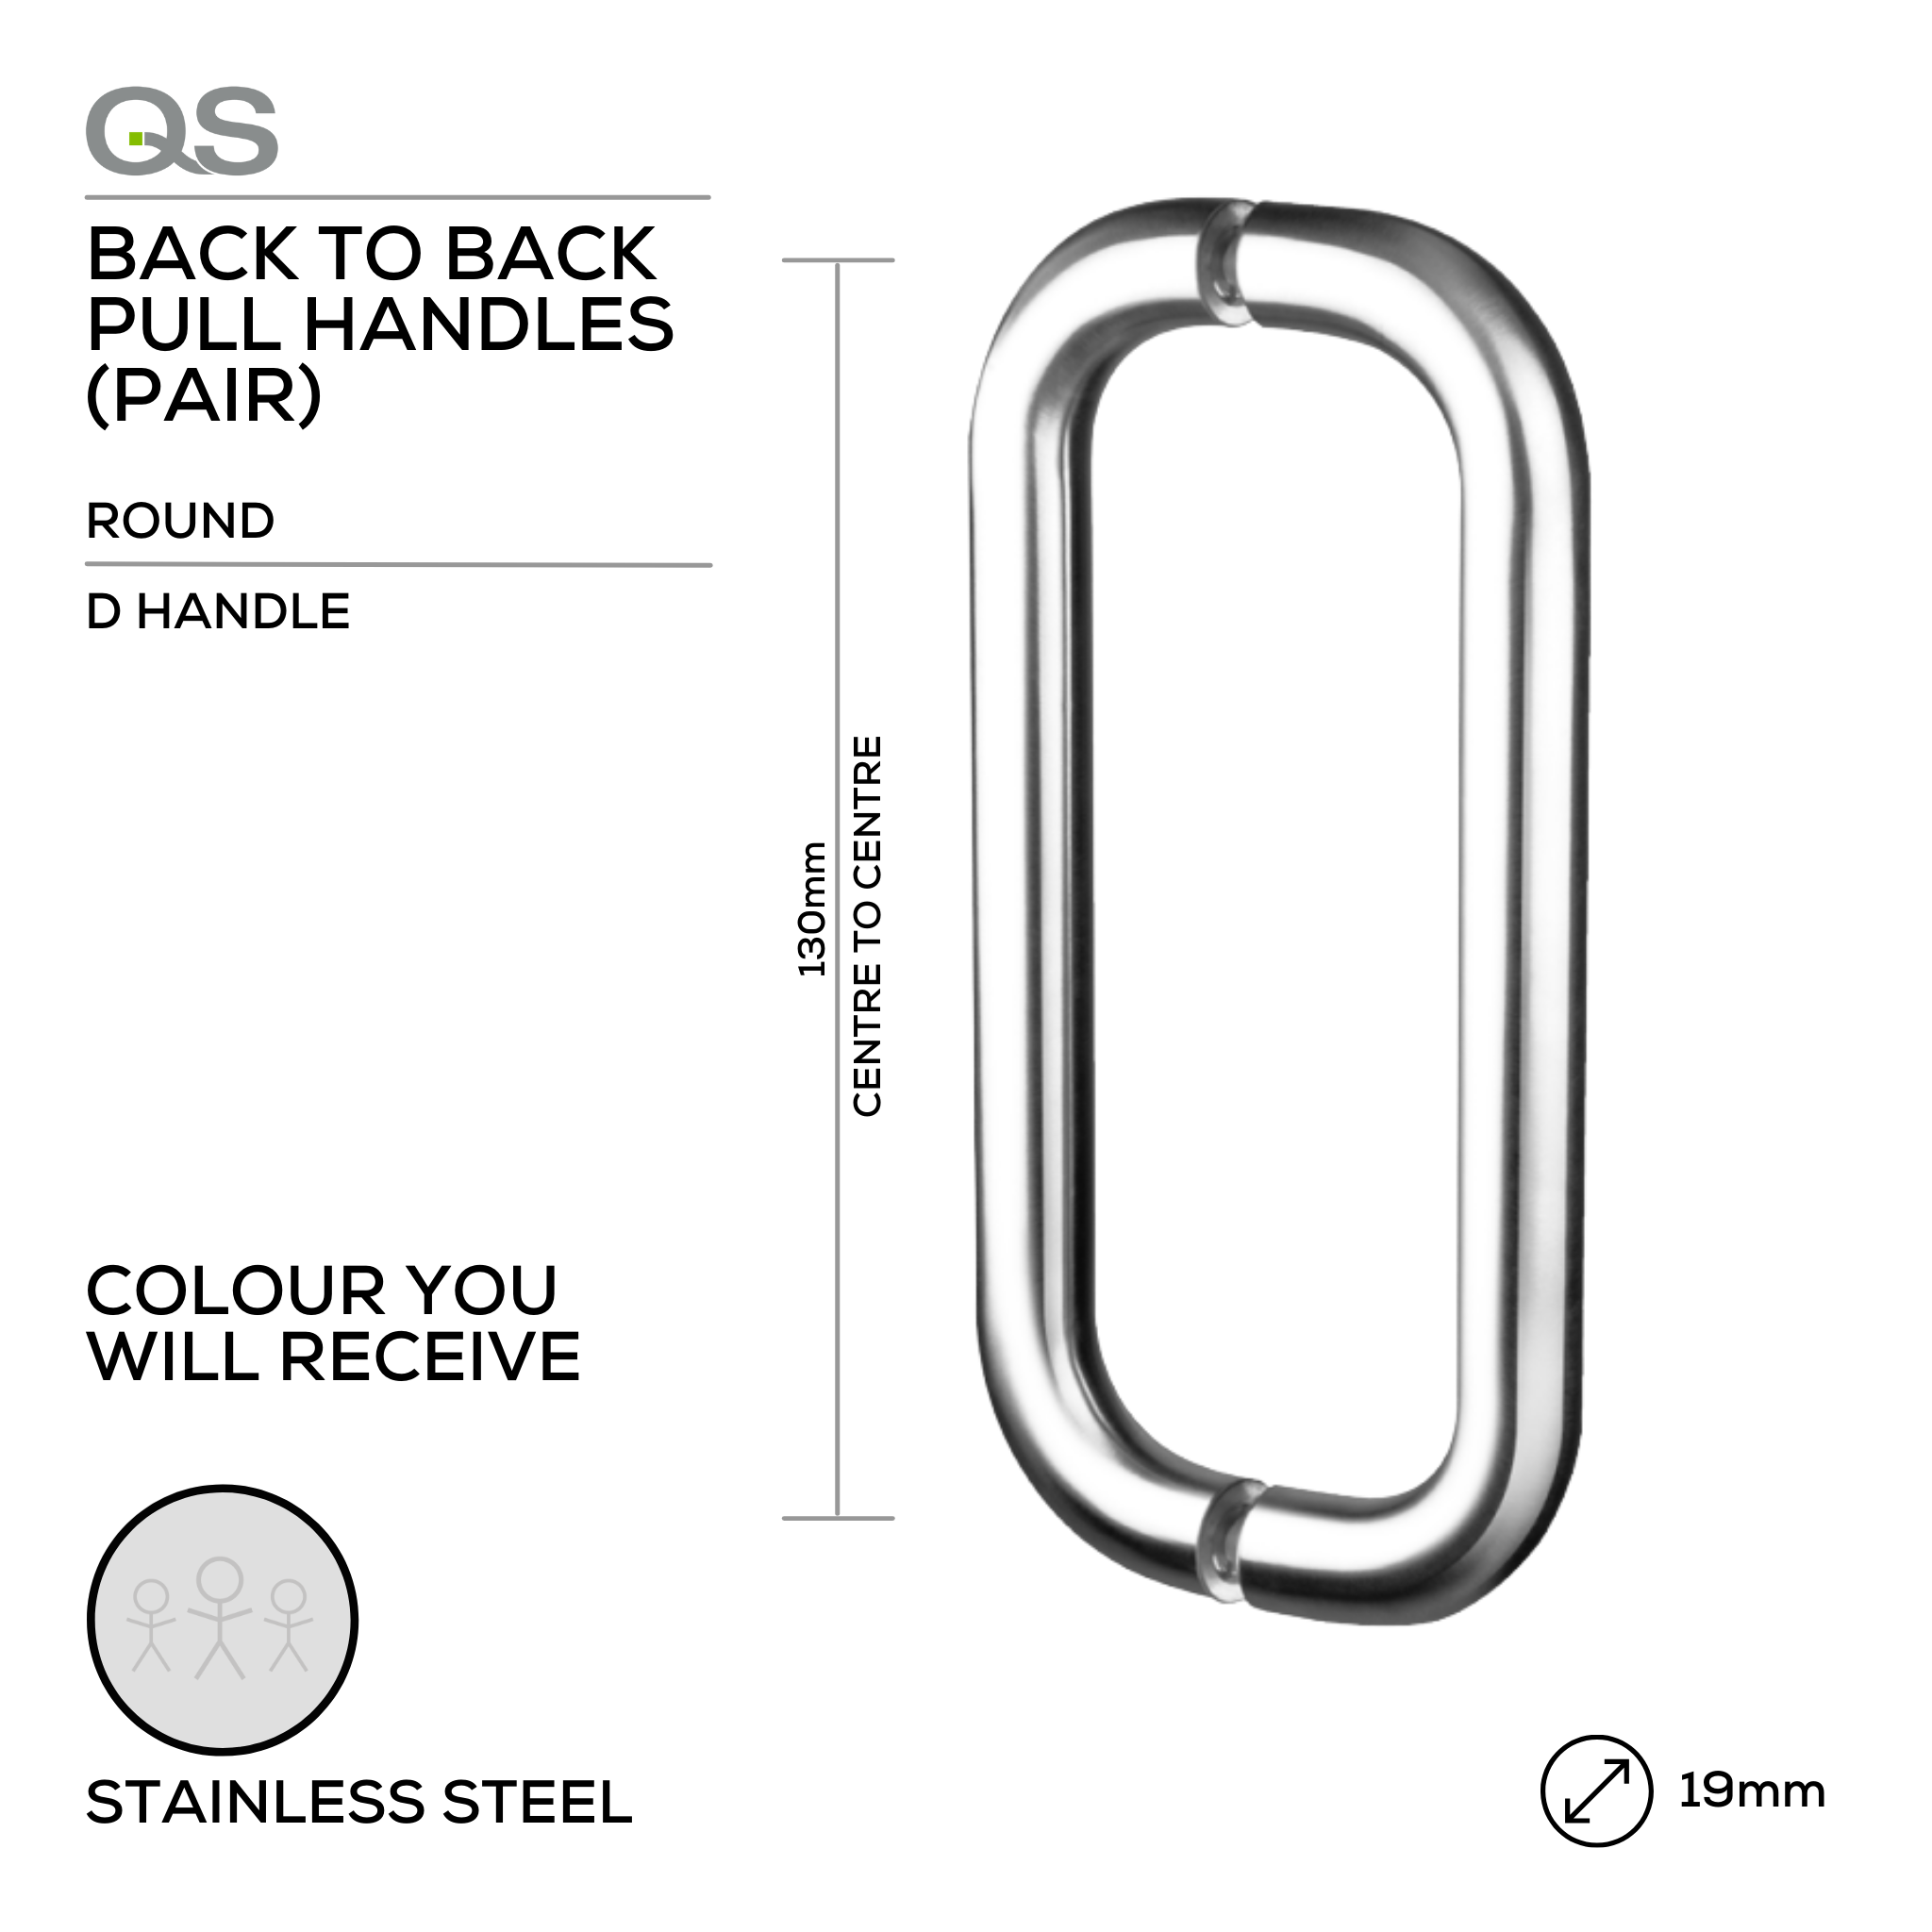 QS2203 D Handle, Pull Handle, Round, D Handle, BTB, 19mm (Ø) x 130mm (ctc), Stainless Steel, QS